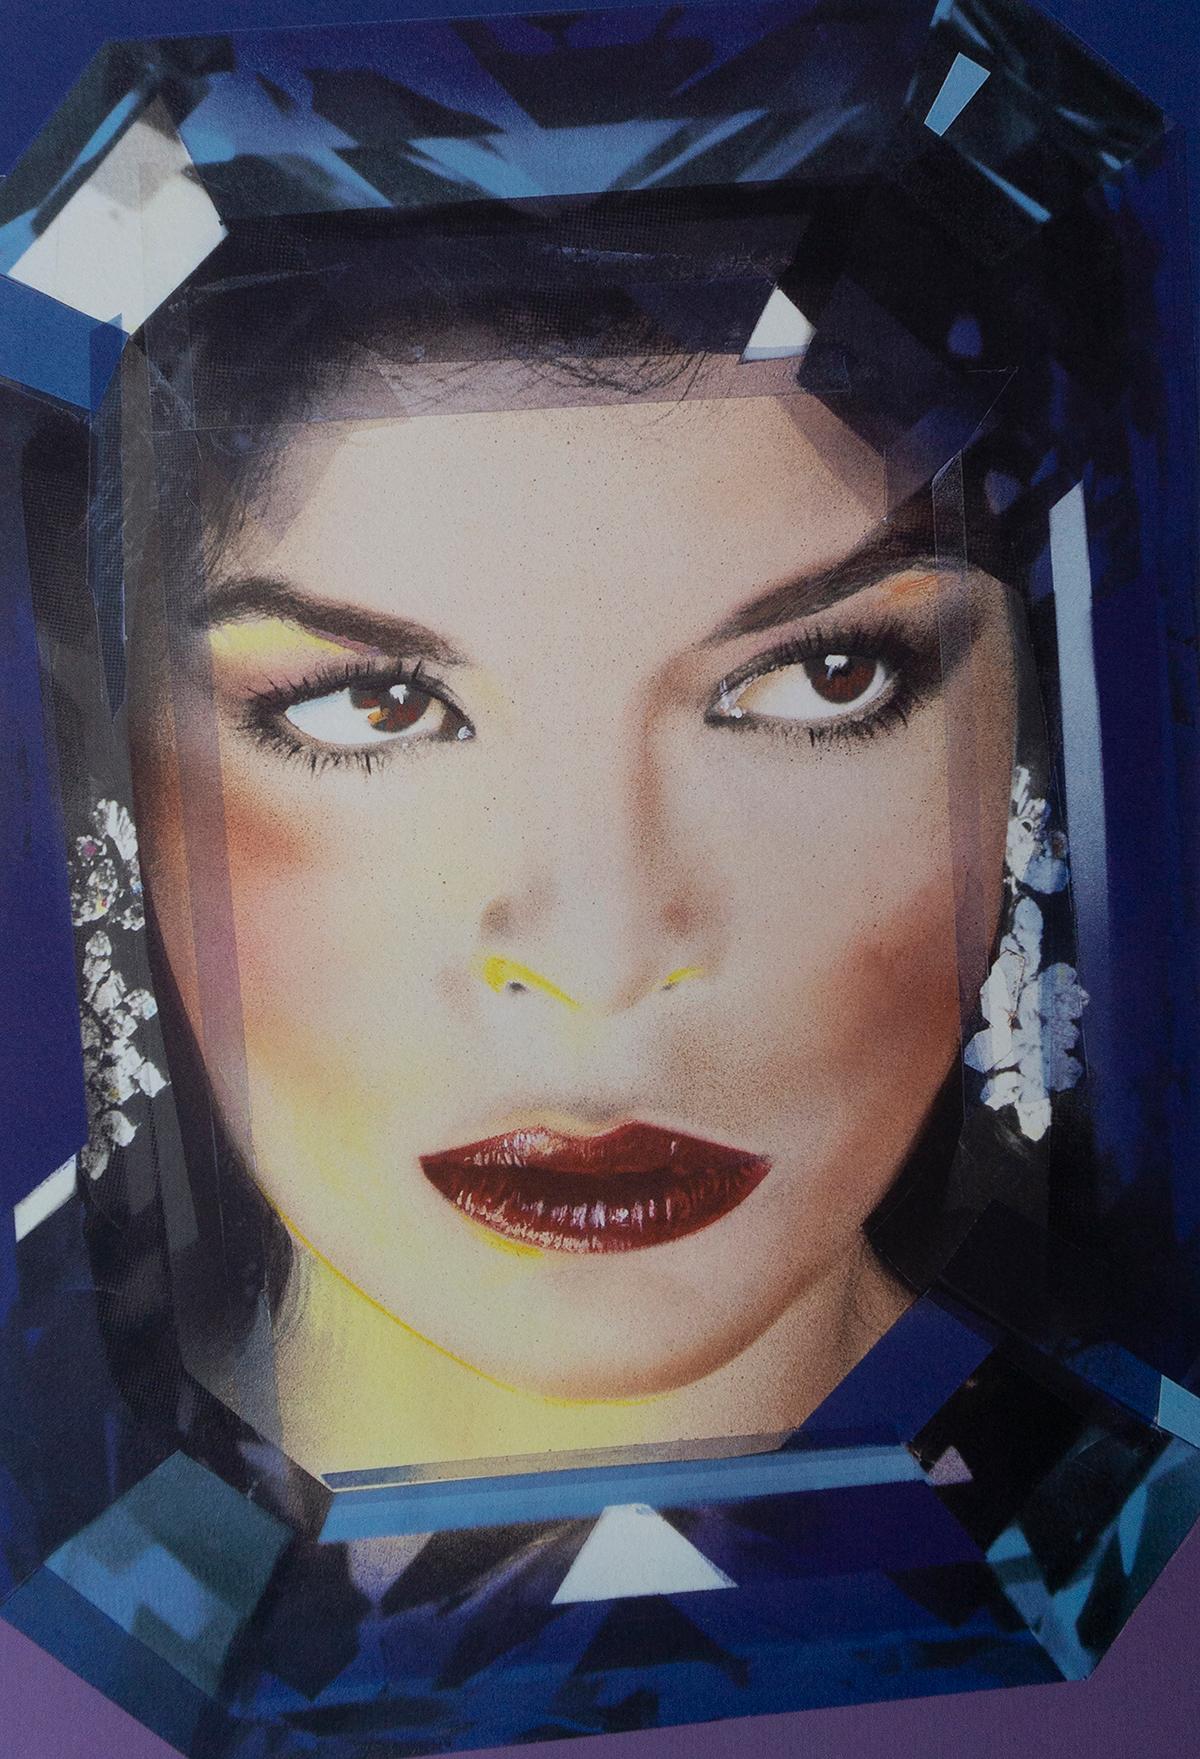 Bianca Jagger In A Diamond portrait for Interview Magazine acrylic print #4/50 - Print by (after) Richard Bernstein